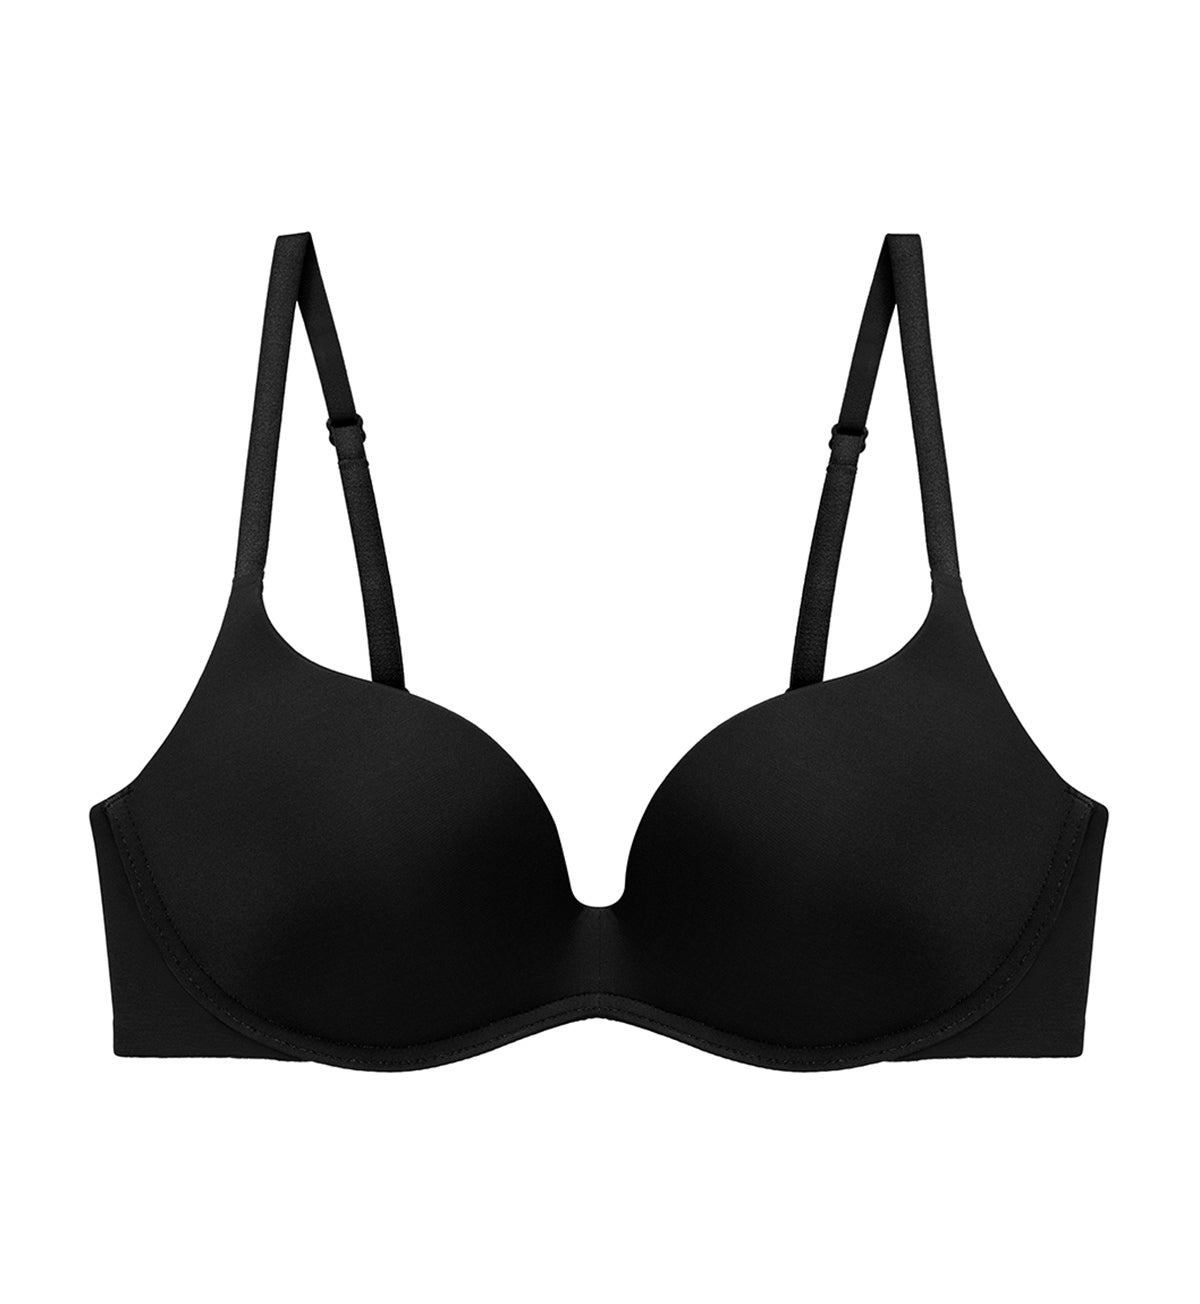 Shop lingerie in Hong Kong: pretty bras and underwear